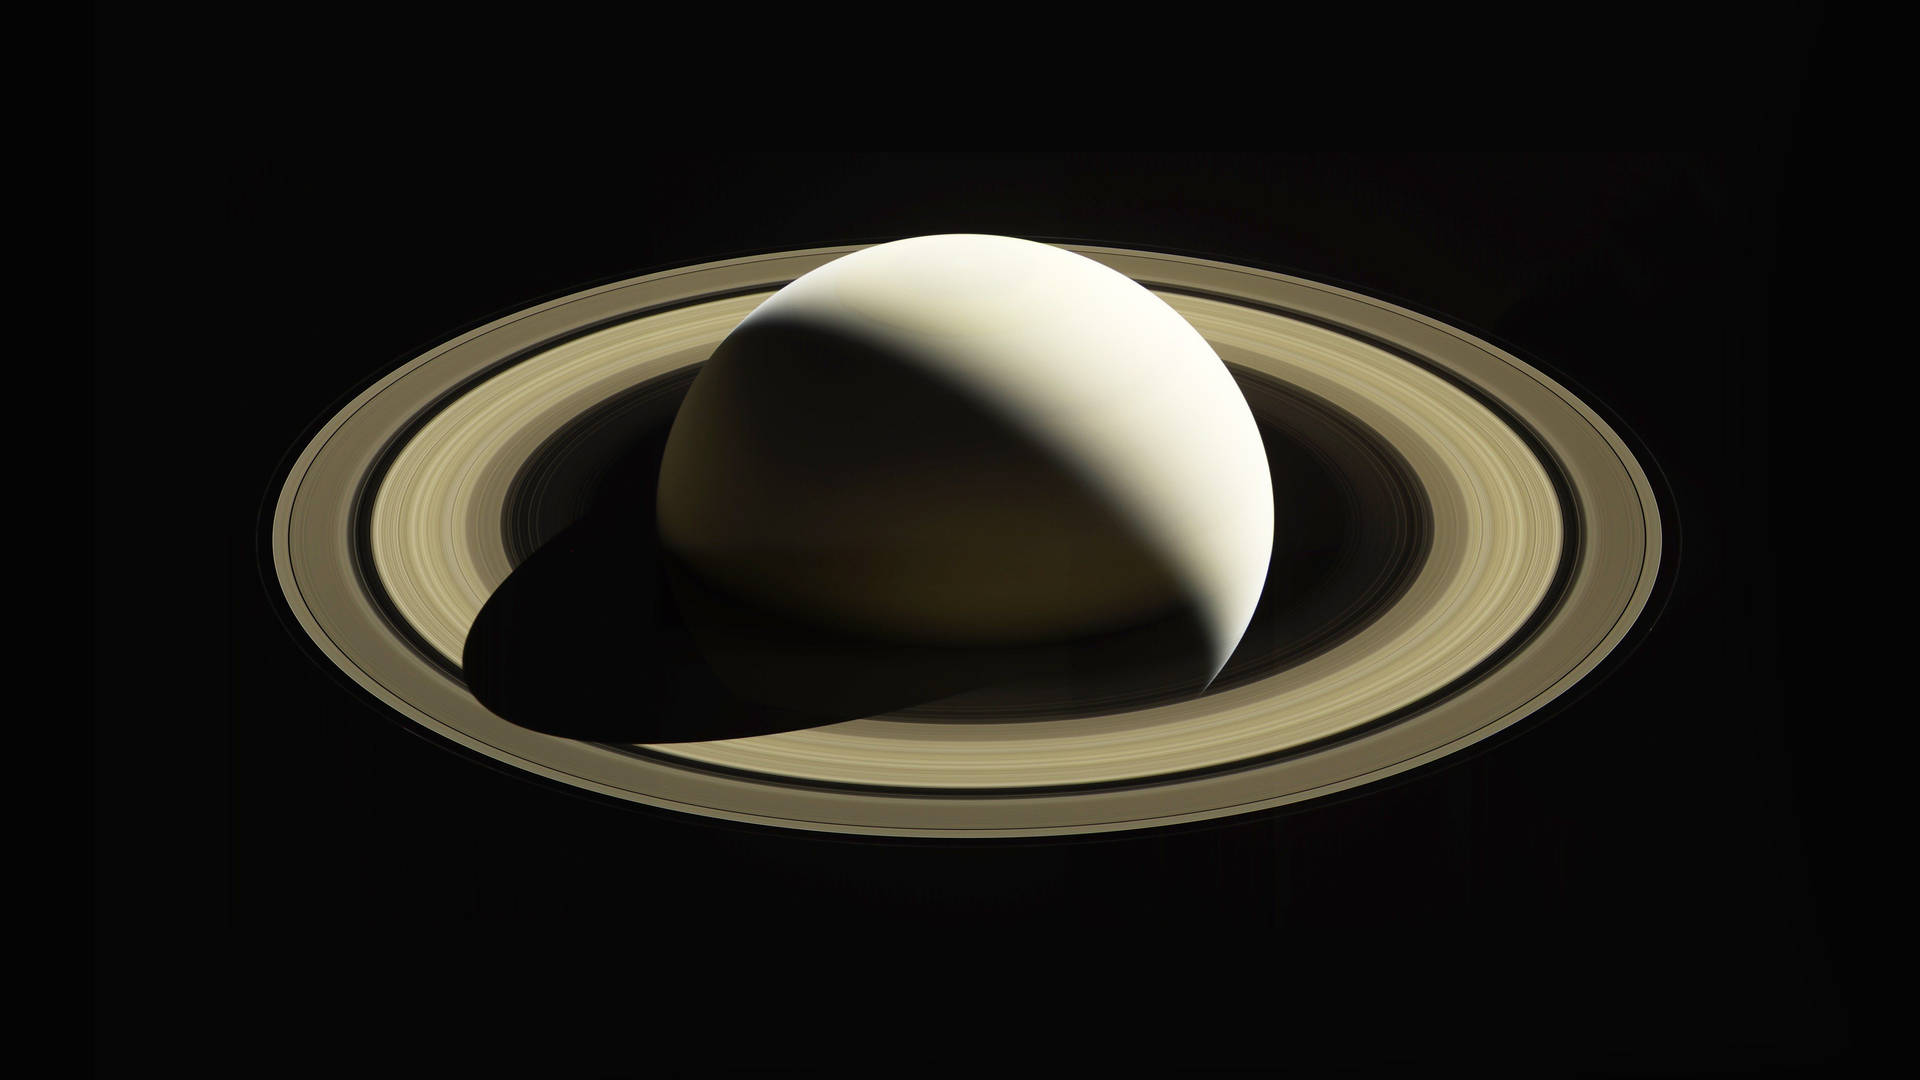 4546X2557 Saturn Wallpaper and Background